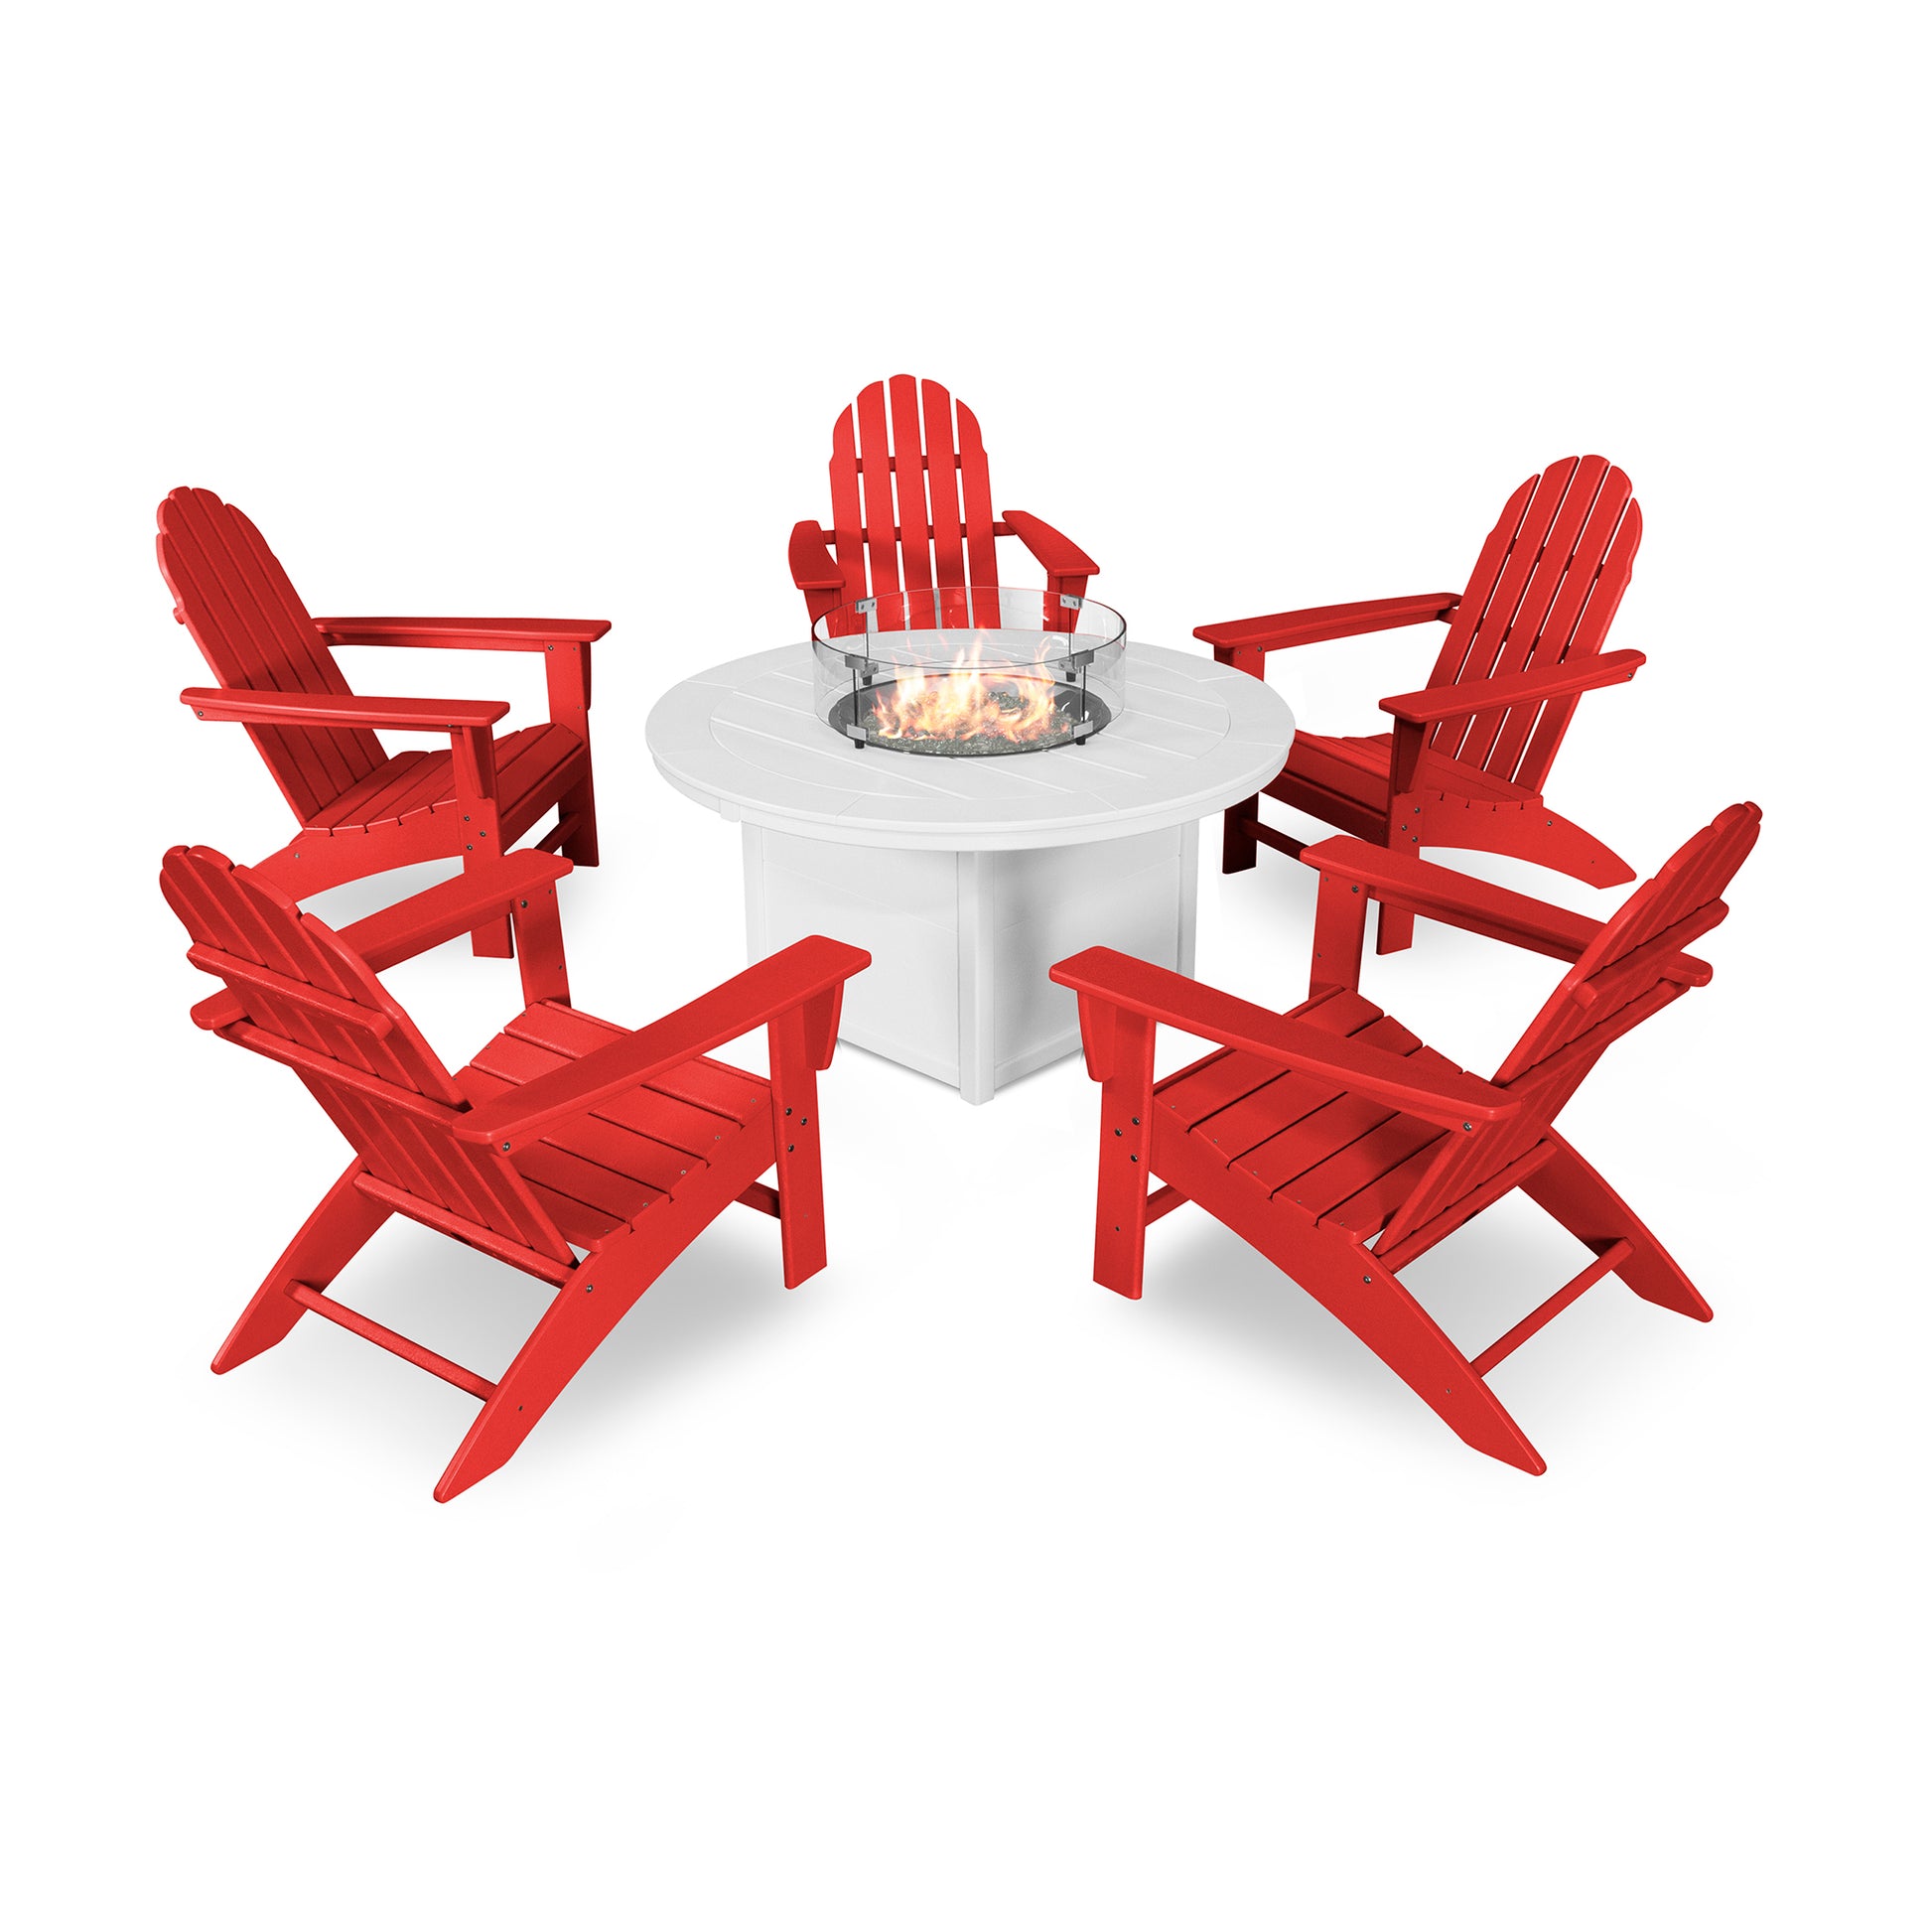 Four POLYWOOD Vineyard Adirondack chairs arranged around a white circular table with a built-in fire pit, set against a plain white background.